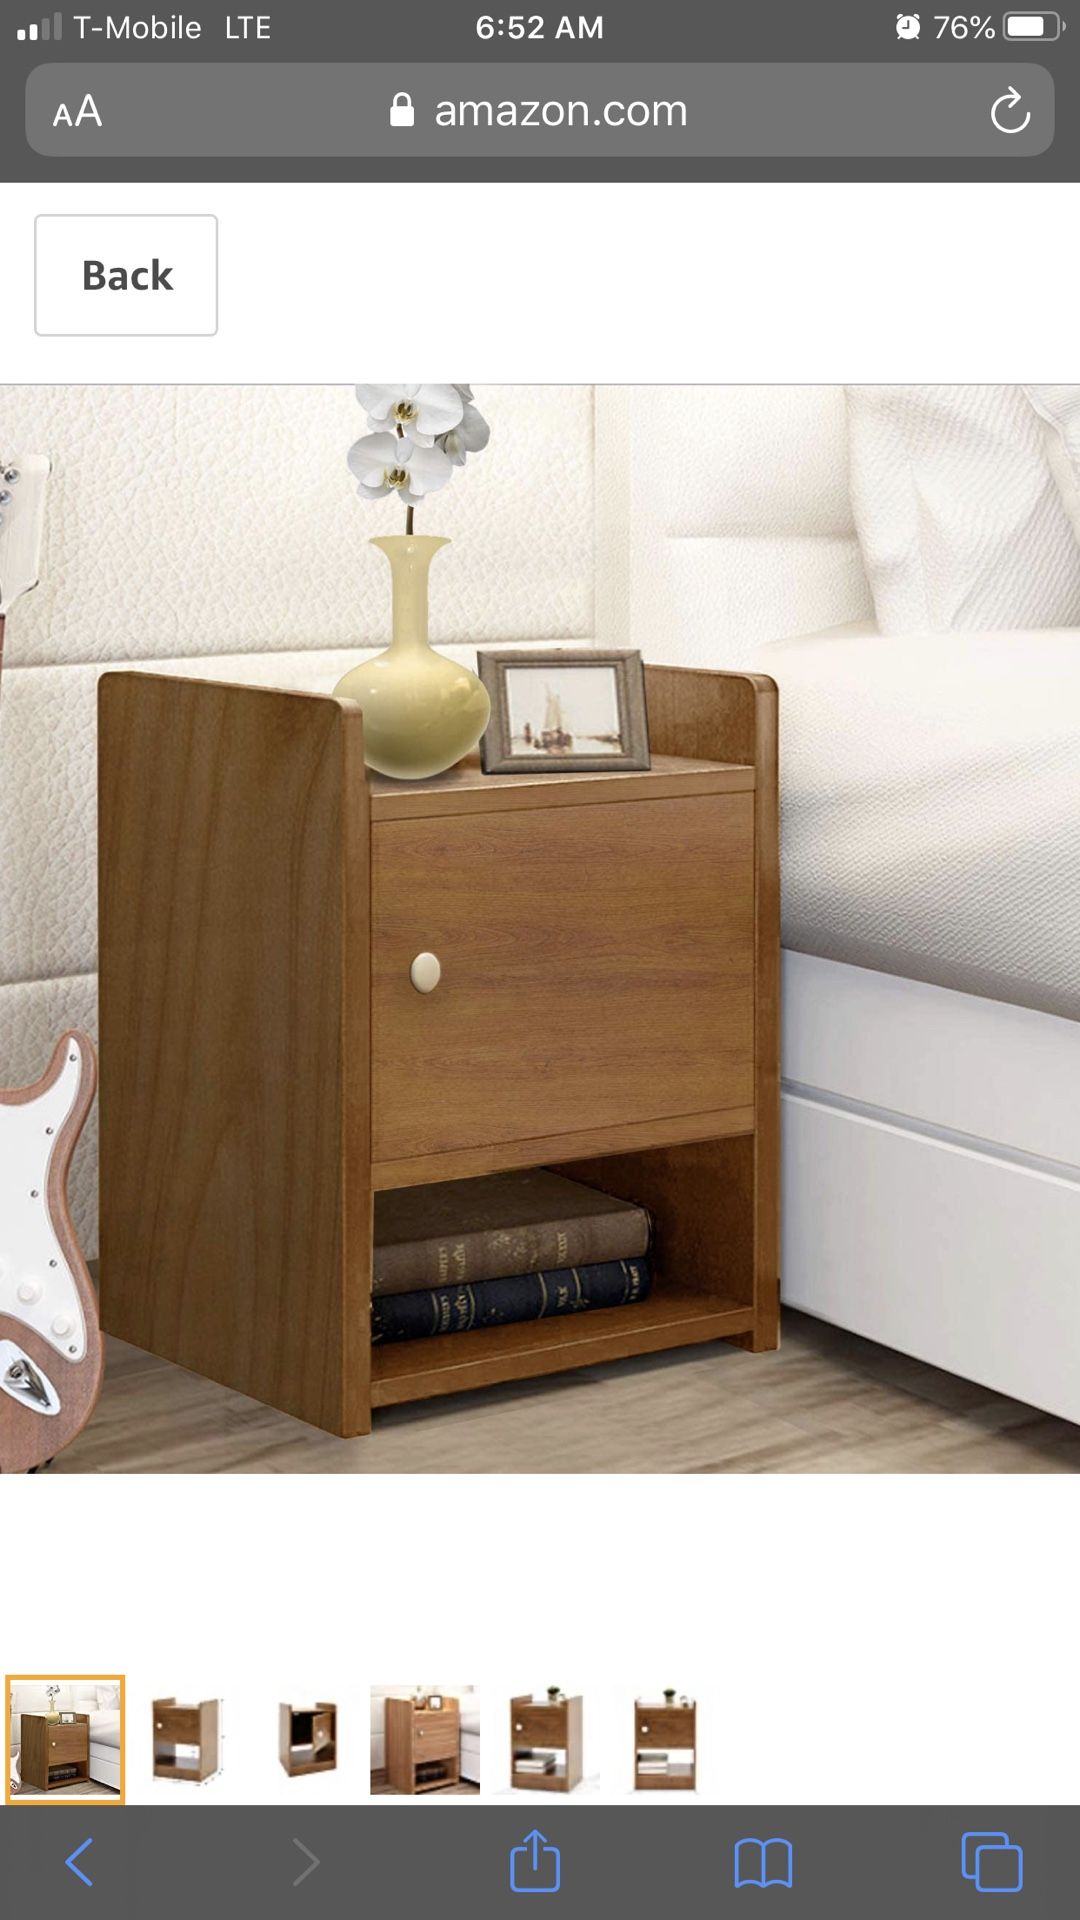 New JERRY & MAGGIE - European Style Modern Nightstands 2 Tier Drawer Shelves Storage Bed Side Table - Multi Function Closet Shelf Organizer - Natural